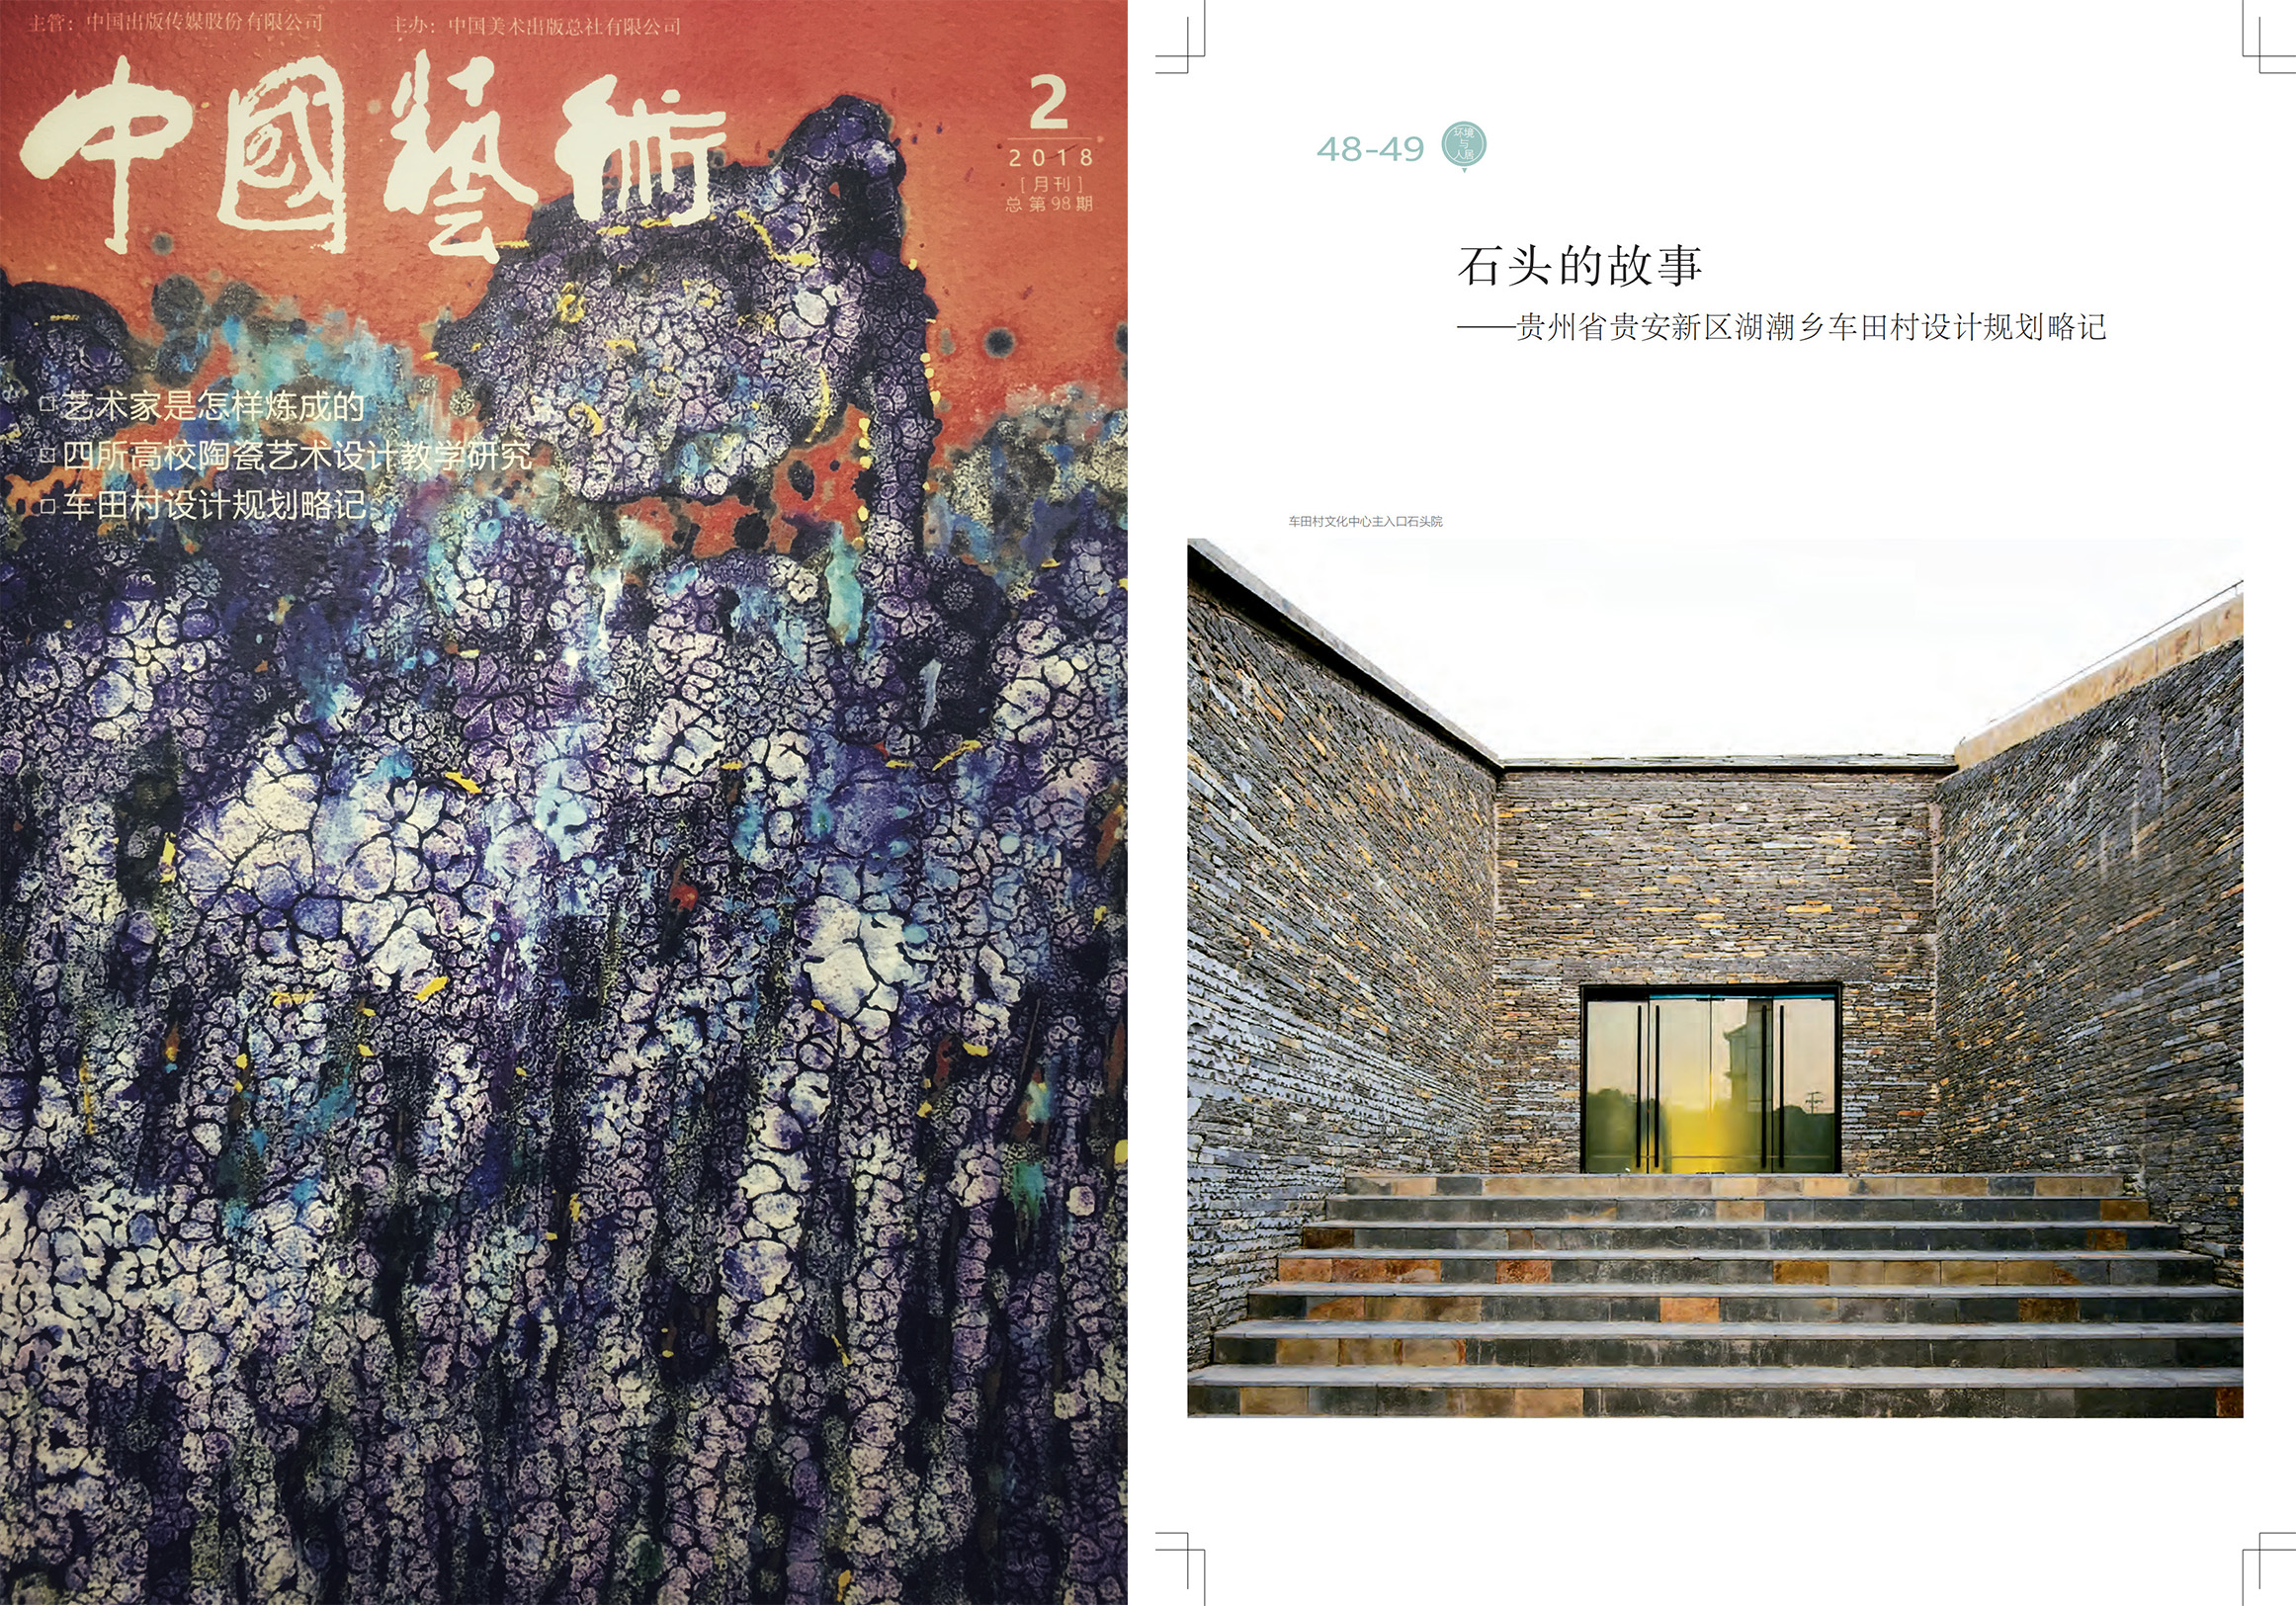 Chinese Art published "Chetian Cultural Center" of West-line Studio in February